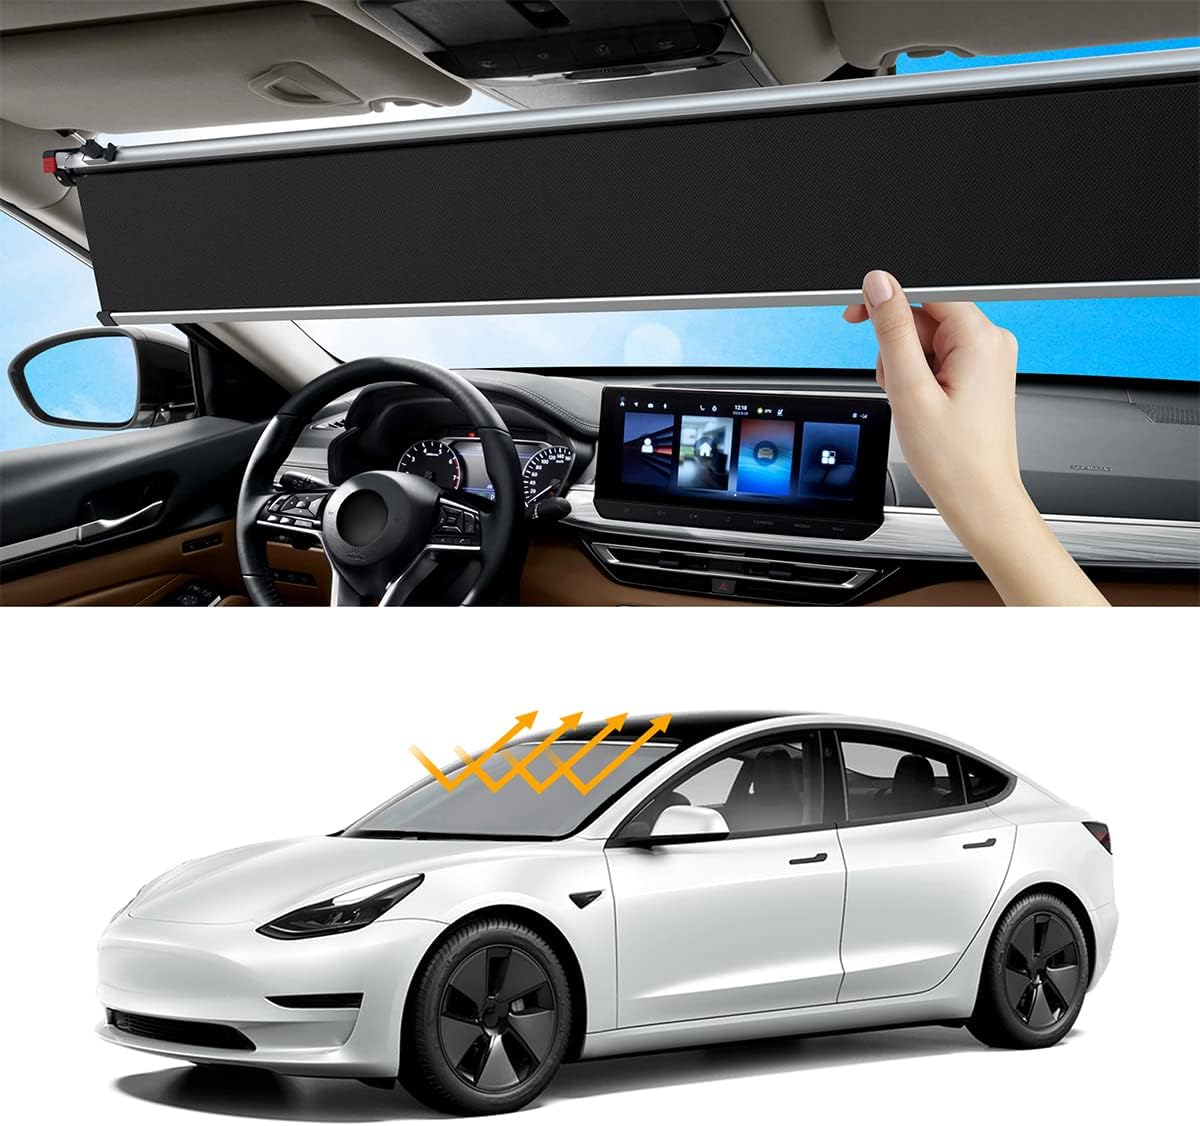 Automatic Scaling Windshield Sun Shade,Automotive Interior Sun Protection,Suitable for Most Models,No Need for Repeated Disassembly.